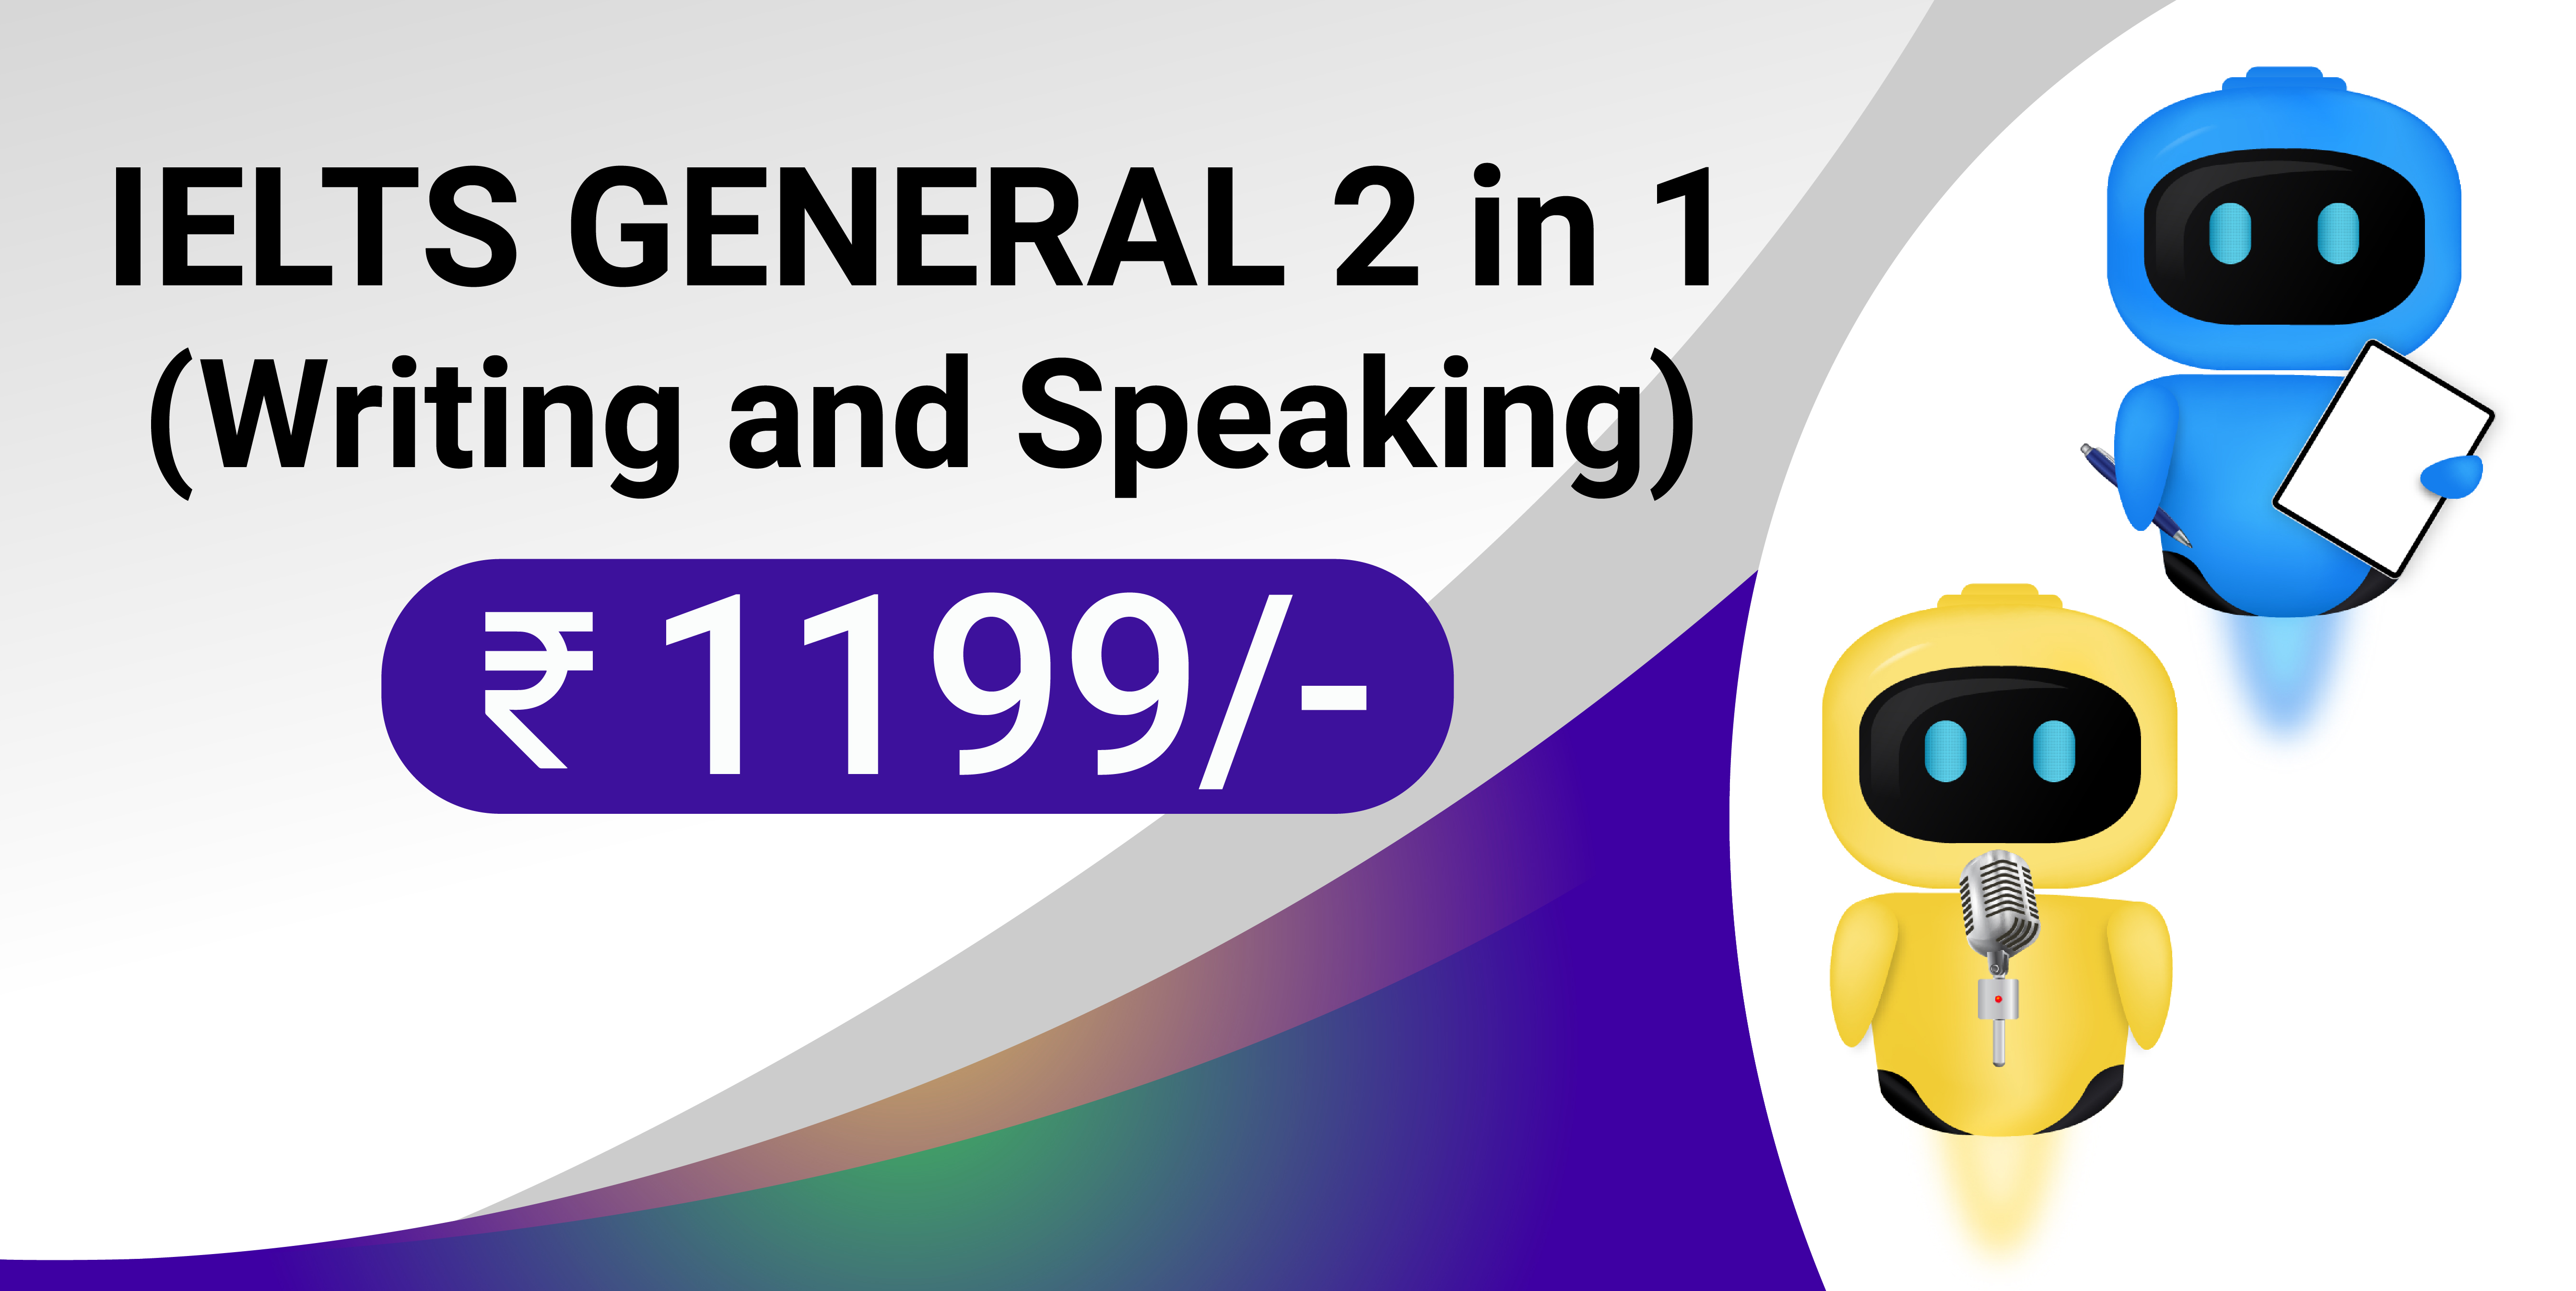 IELTS GENERAL  2 in 1 (Writing and Speaking)